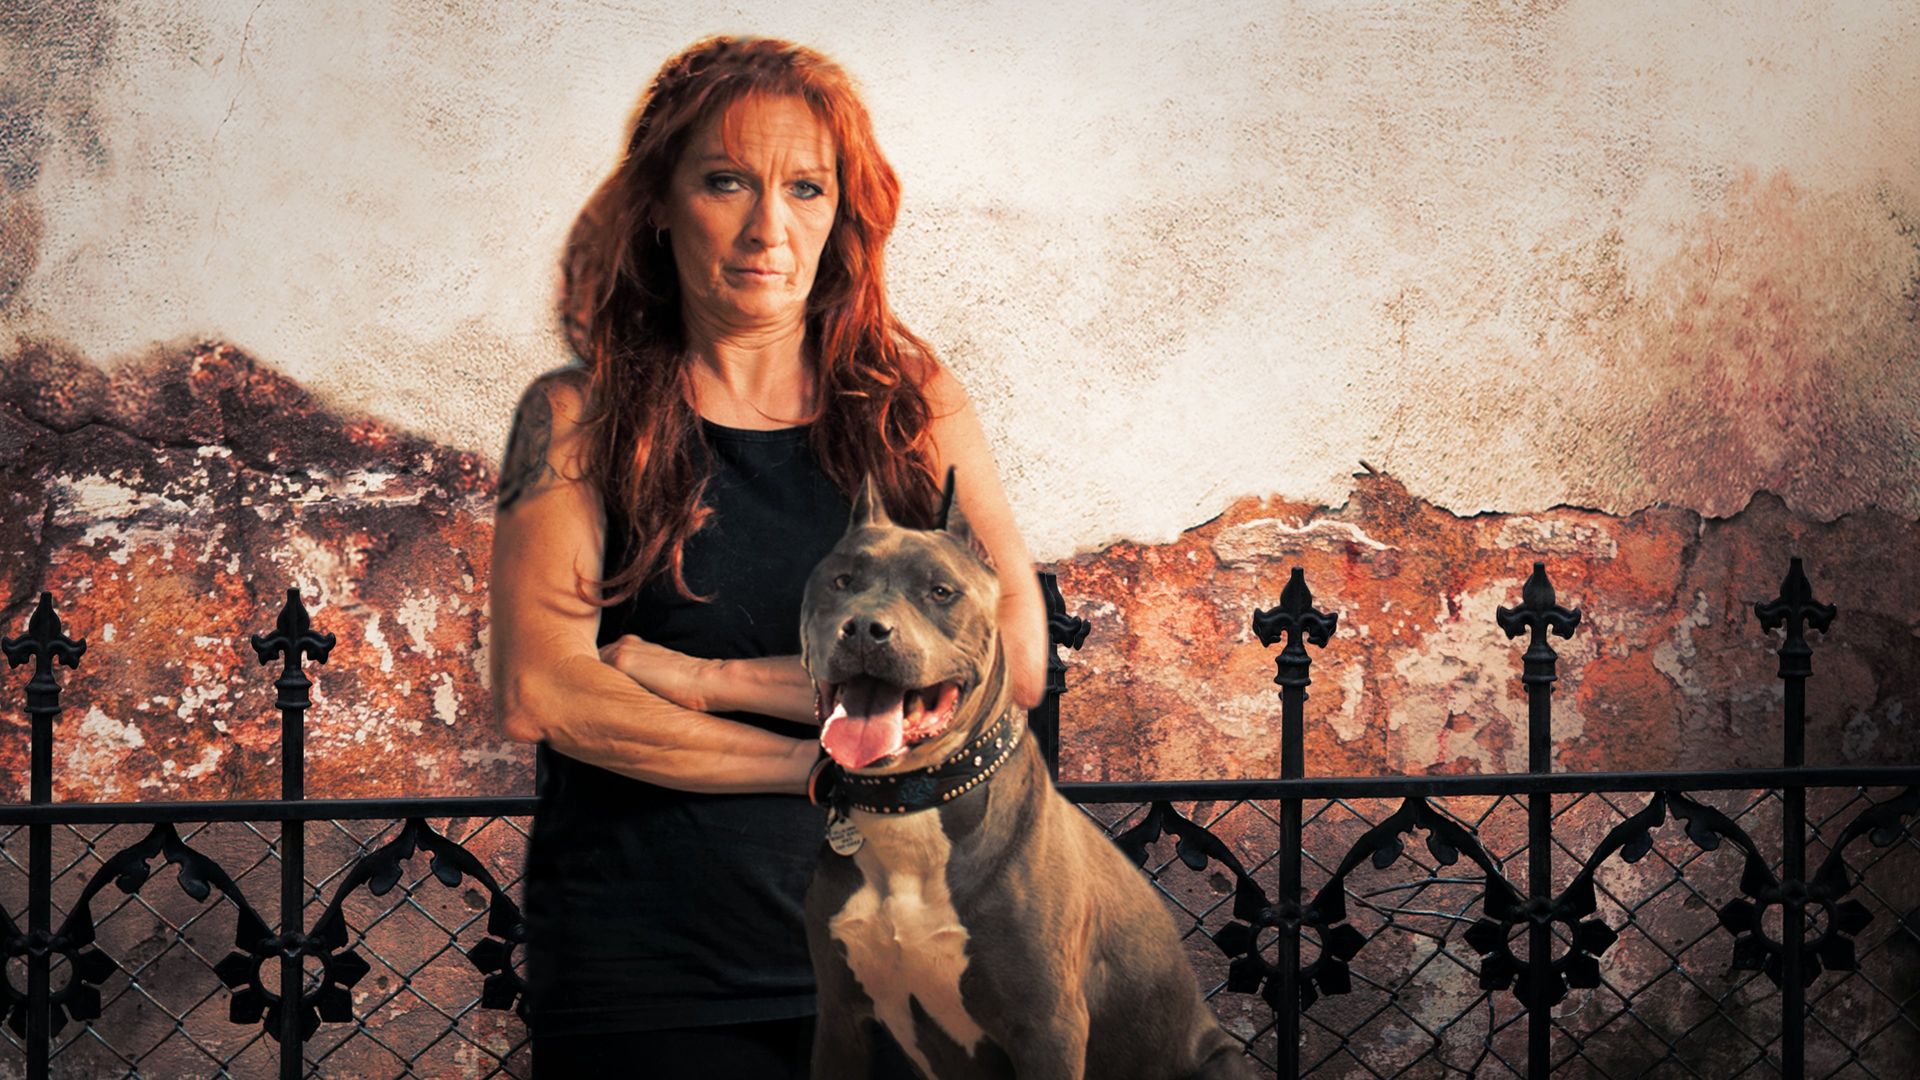 Pit Bulls and Parolees background